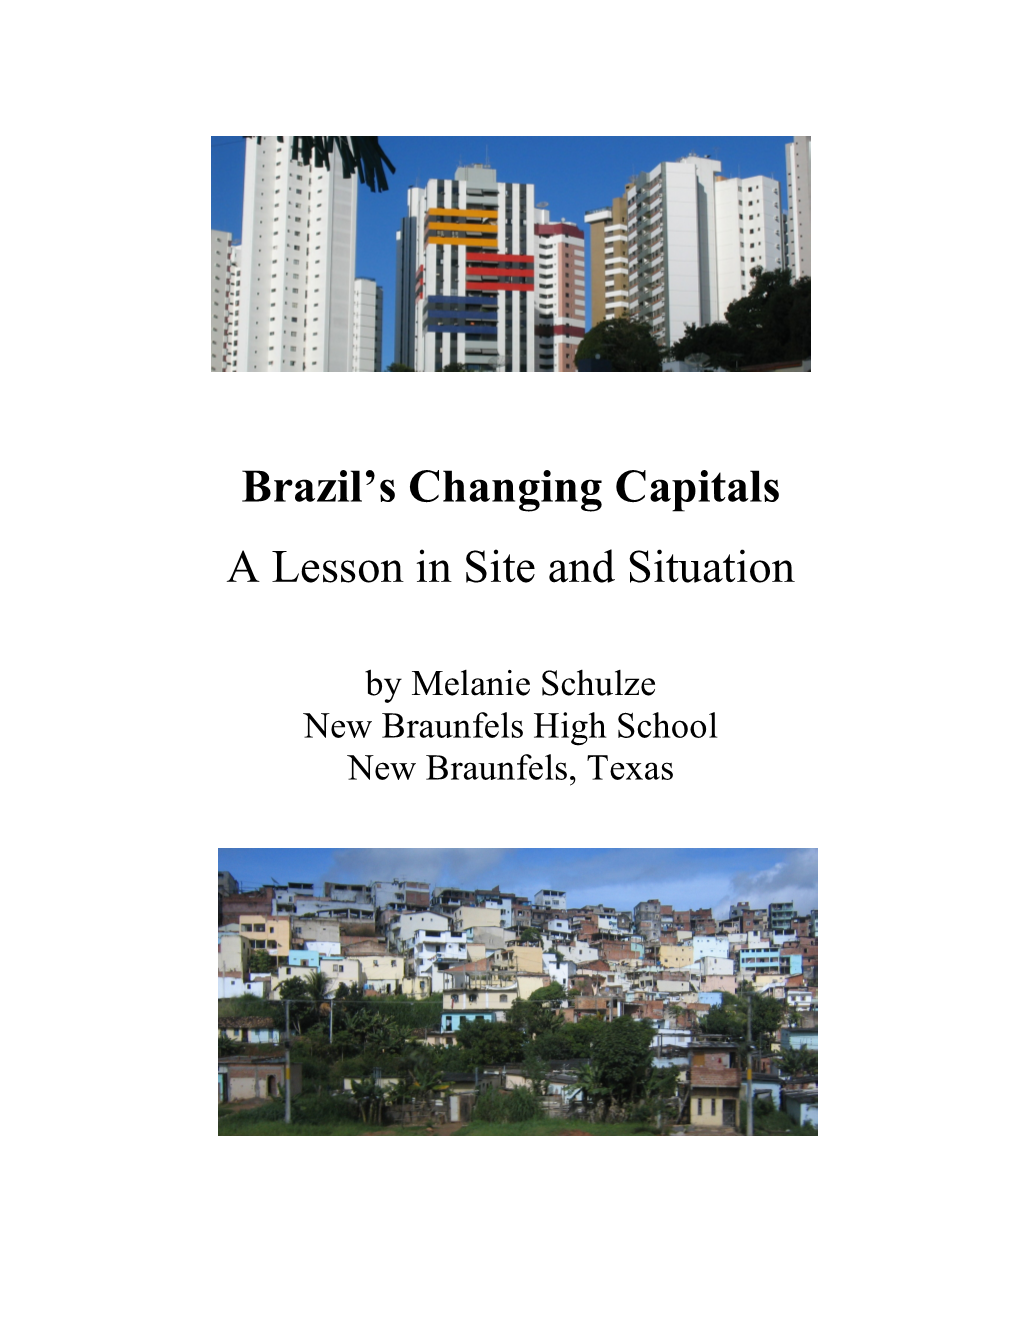 Brazil's Changing Capitals a Lesson in Site and Situation